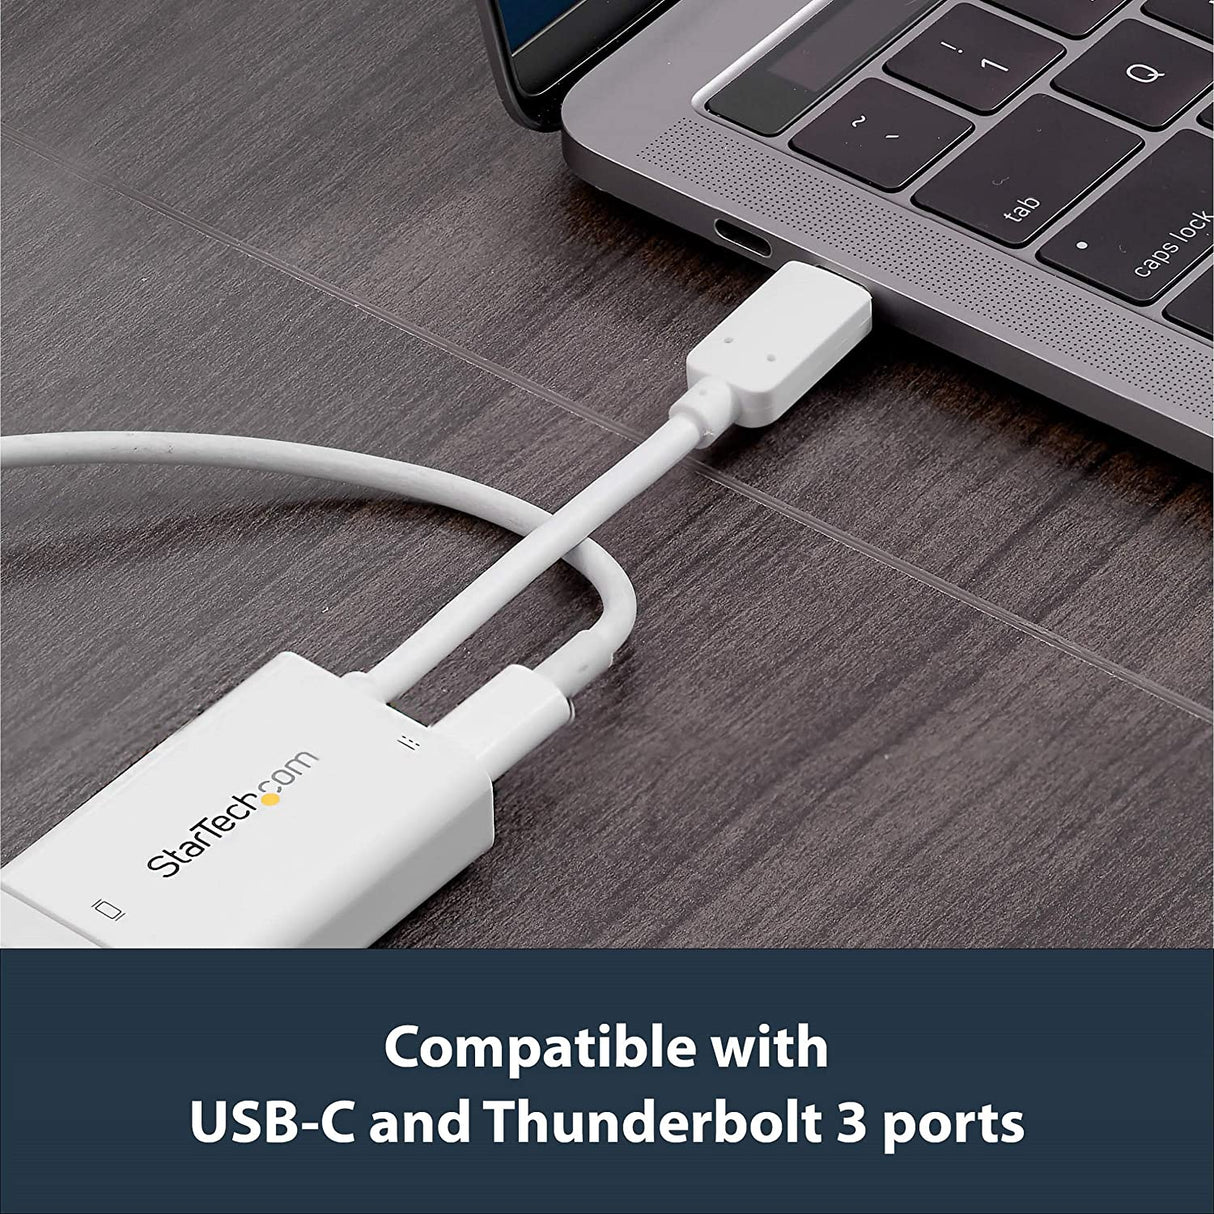 StarTech.com USB C to VGA Adapter with Power Delivery - 1080p USB Type-C to VGA Monitor Video Converter w/ Charging - 60W PD Pass-Through - Thunderbolt 3 Compatible - White (CDP2VGAUCPW)